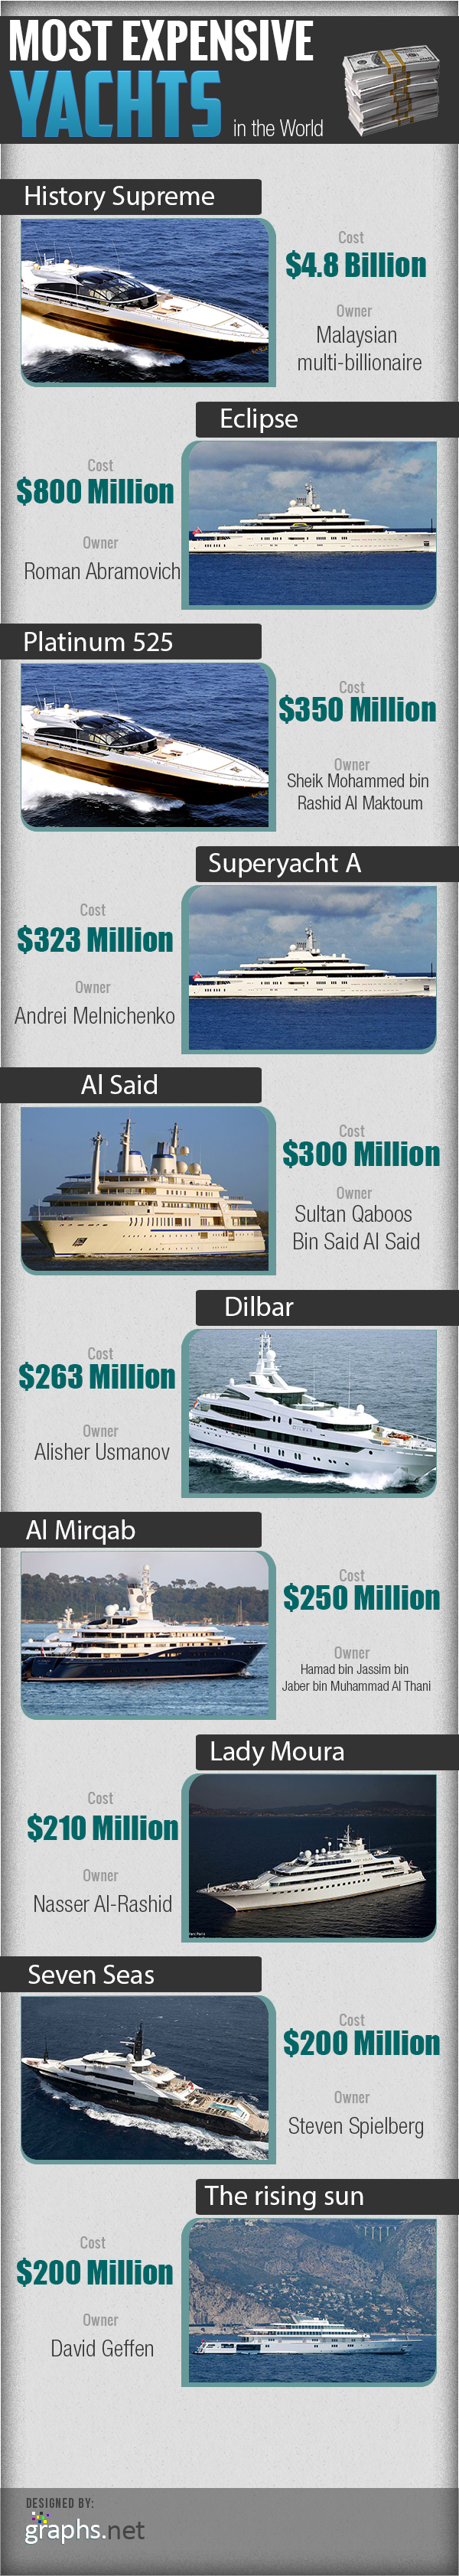 Most-Expensive-Yachts